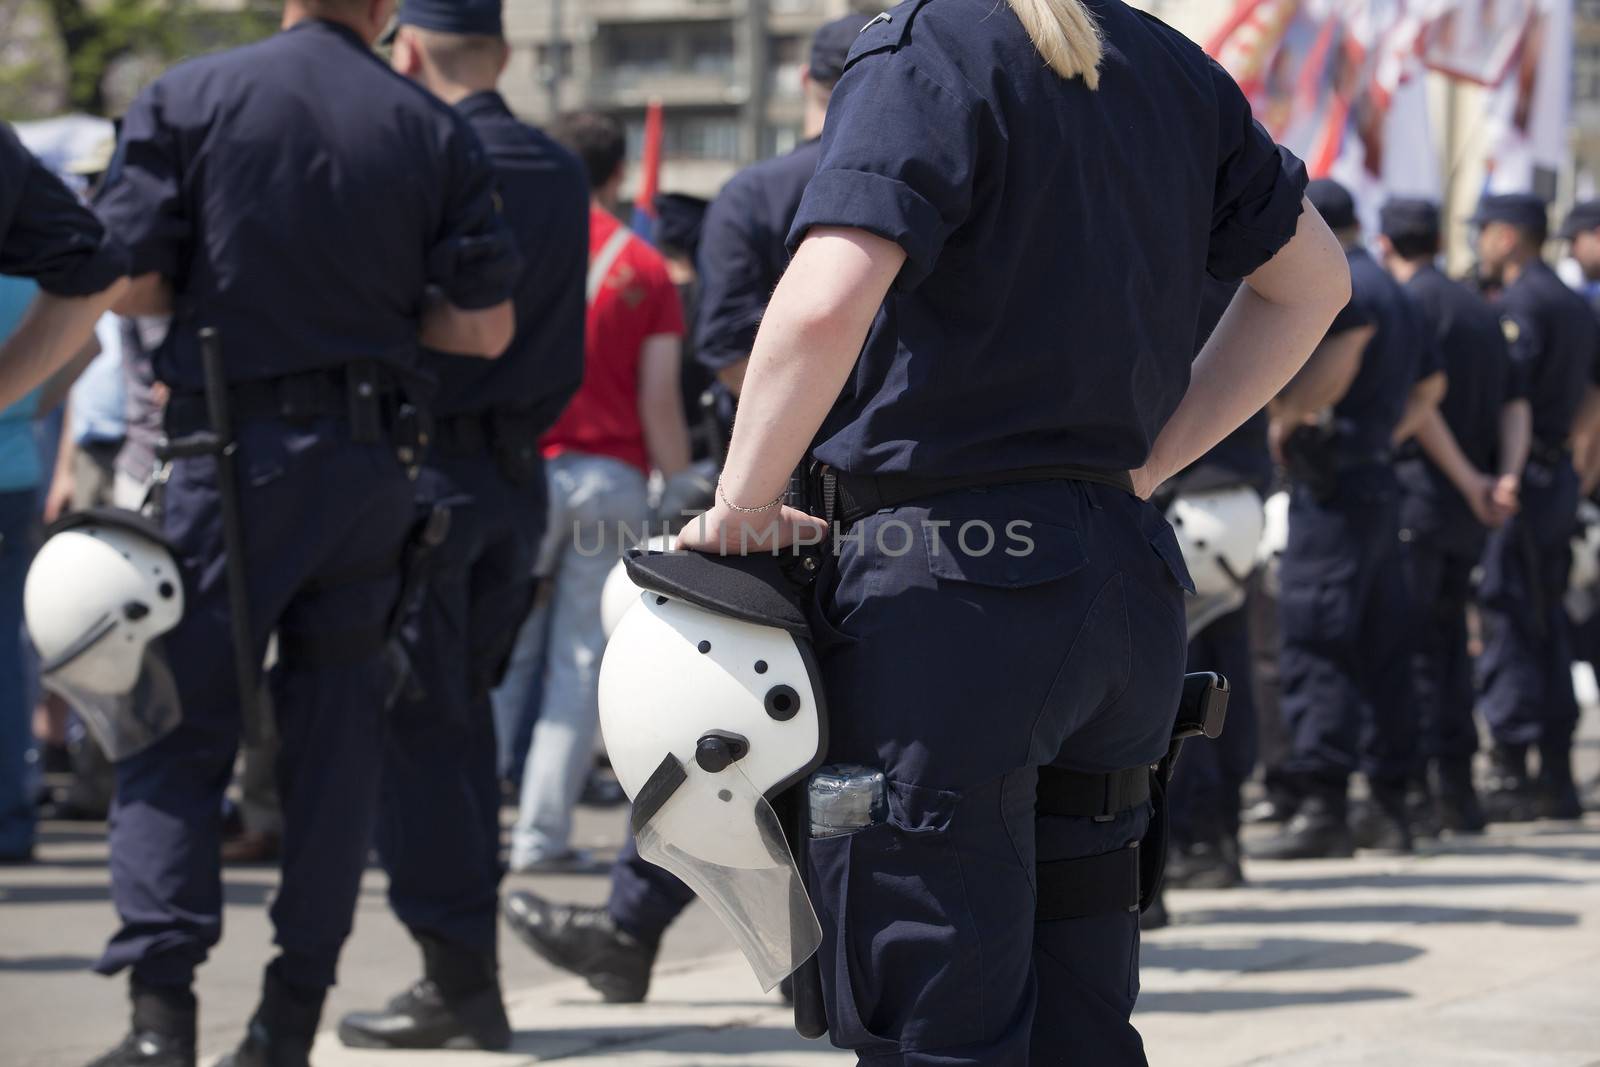 Police on duty during a street protest